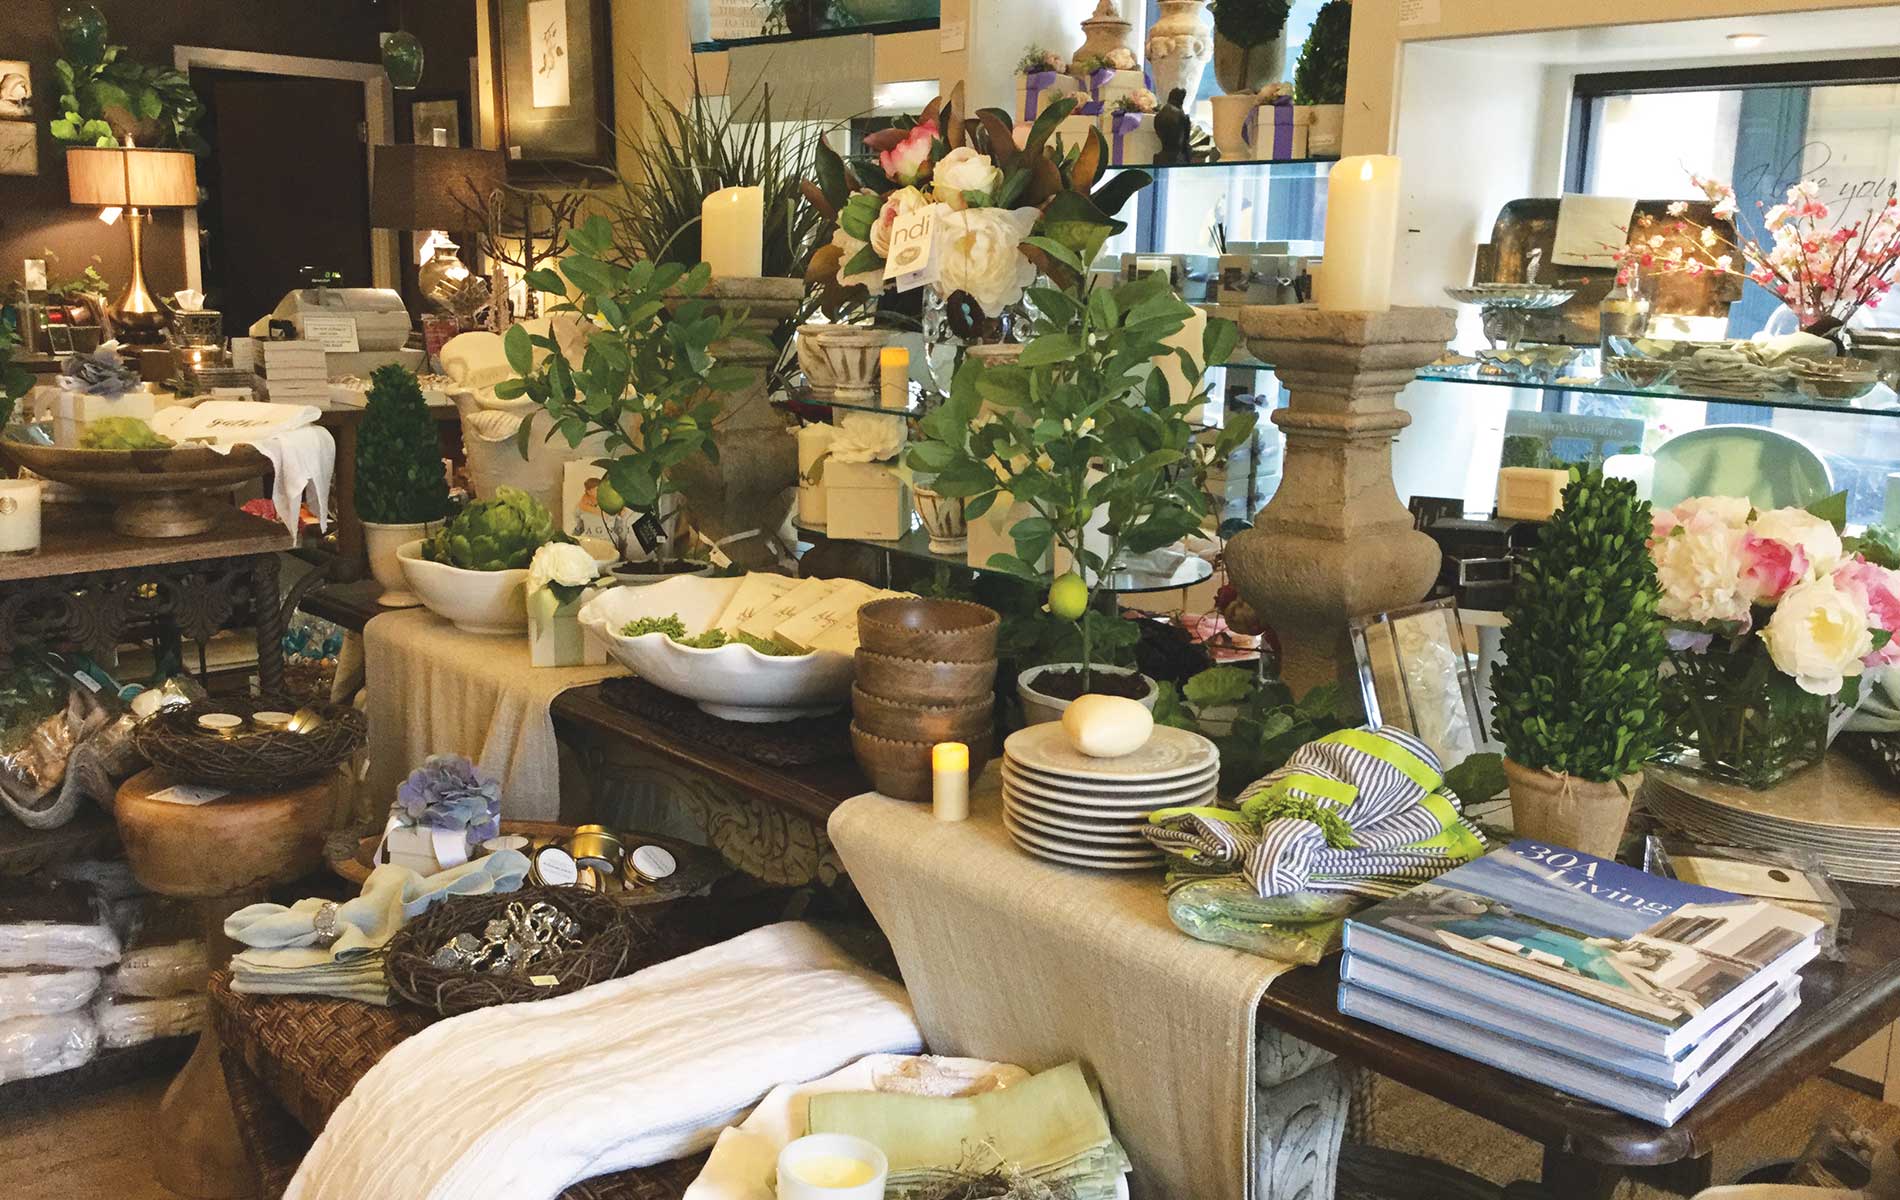 Magnolia House Lifestyle Store, located in the Grand Boulevard Town Centre in Miramar Beach, Florida, offers home decor, books, original artwork, and much more.